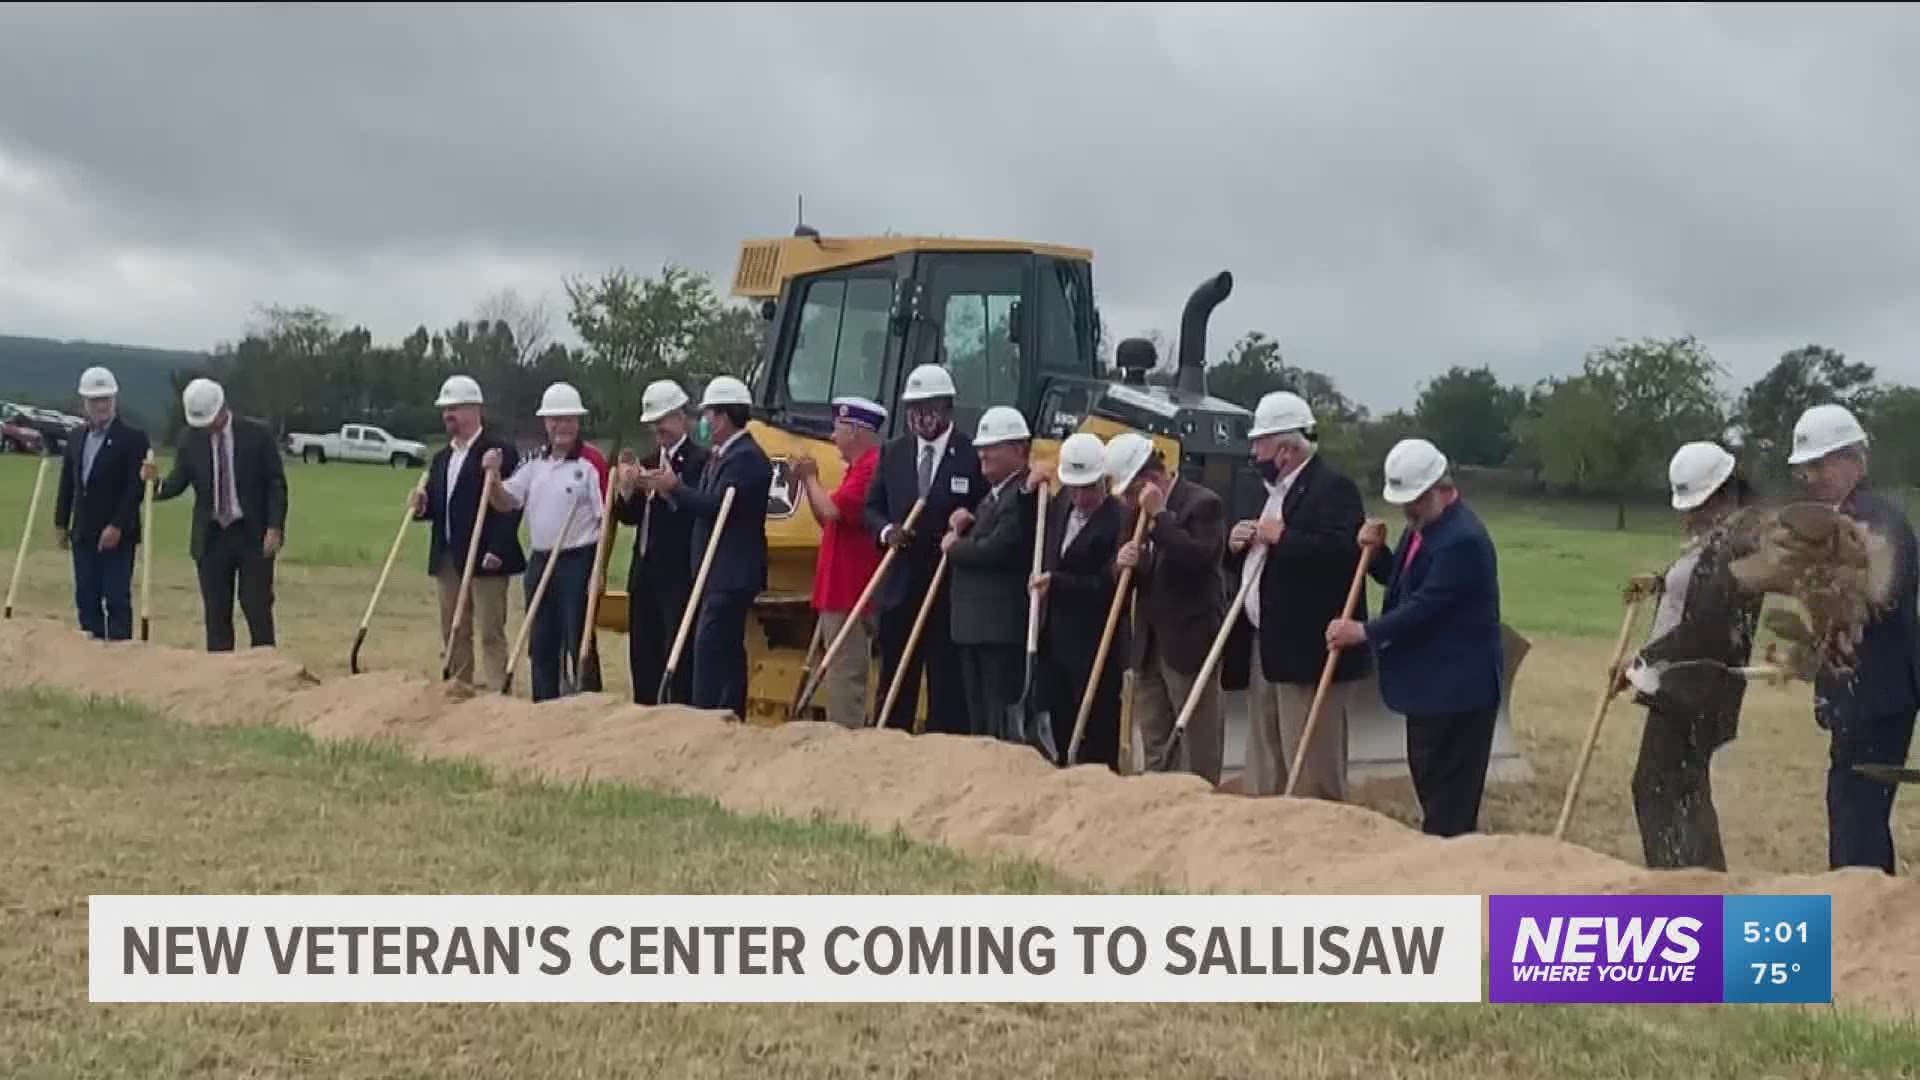 The community came together to break ground on the new Sallisaw Veteran’s Home.